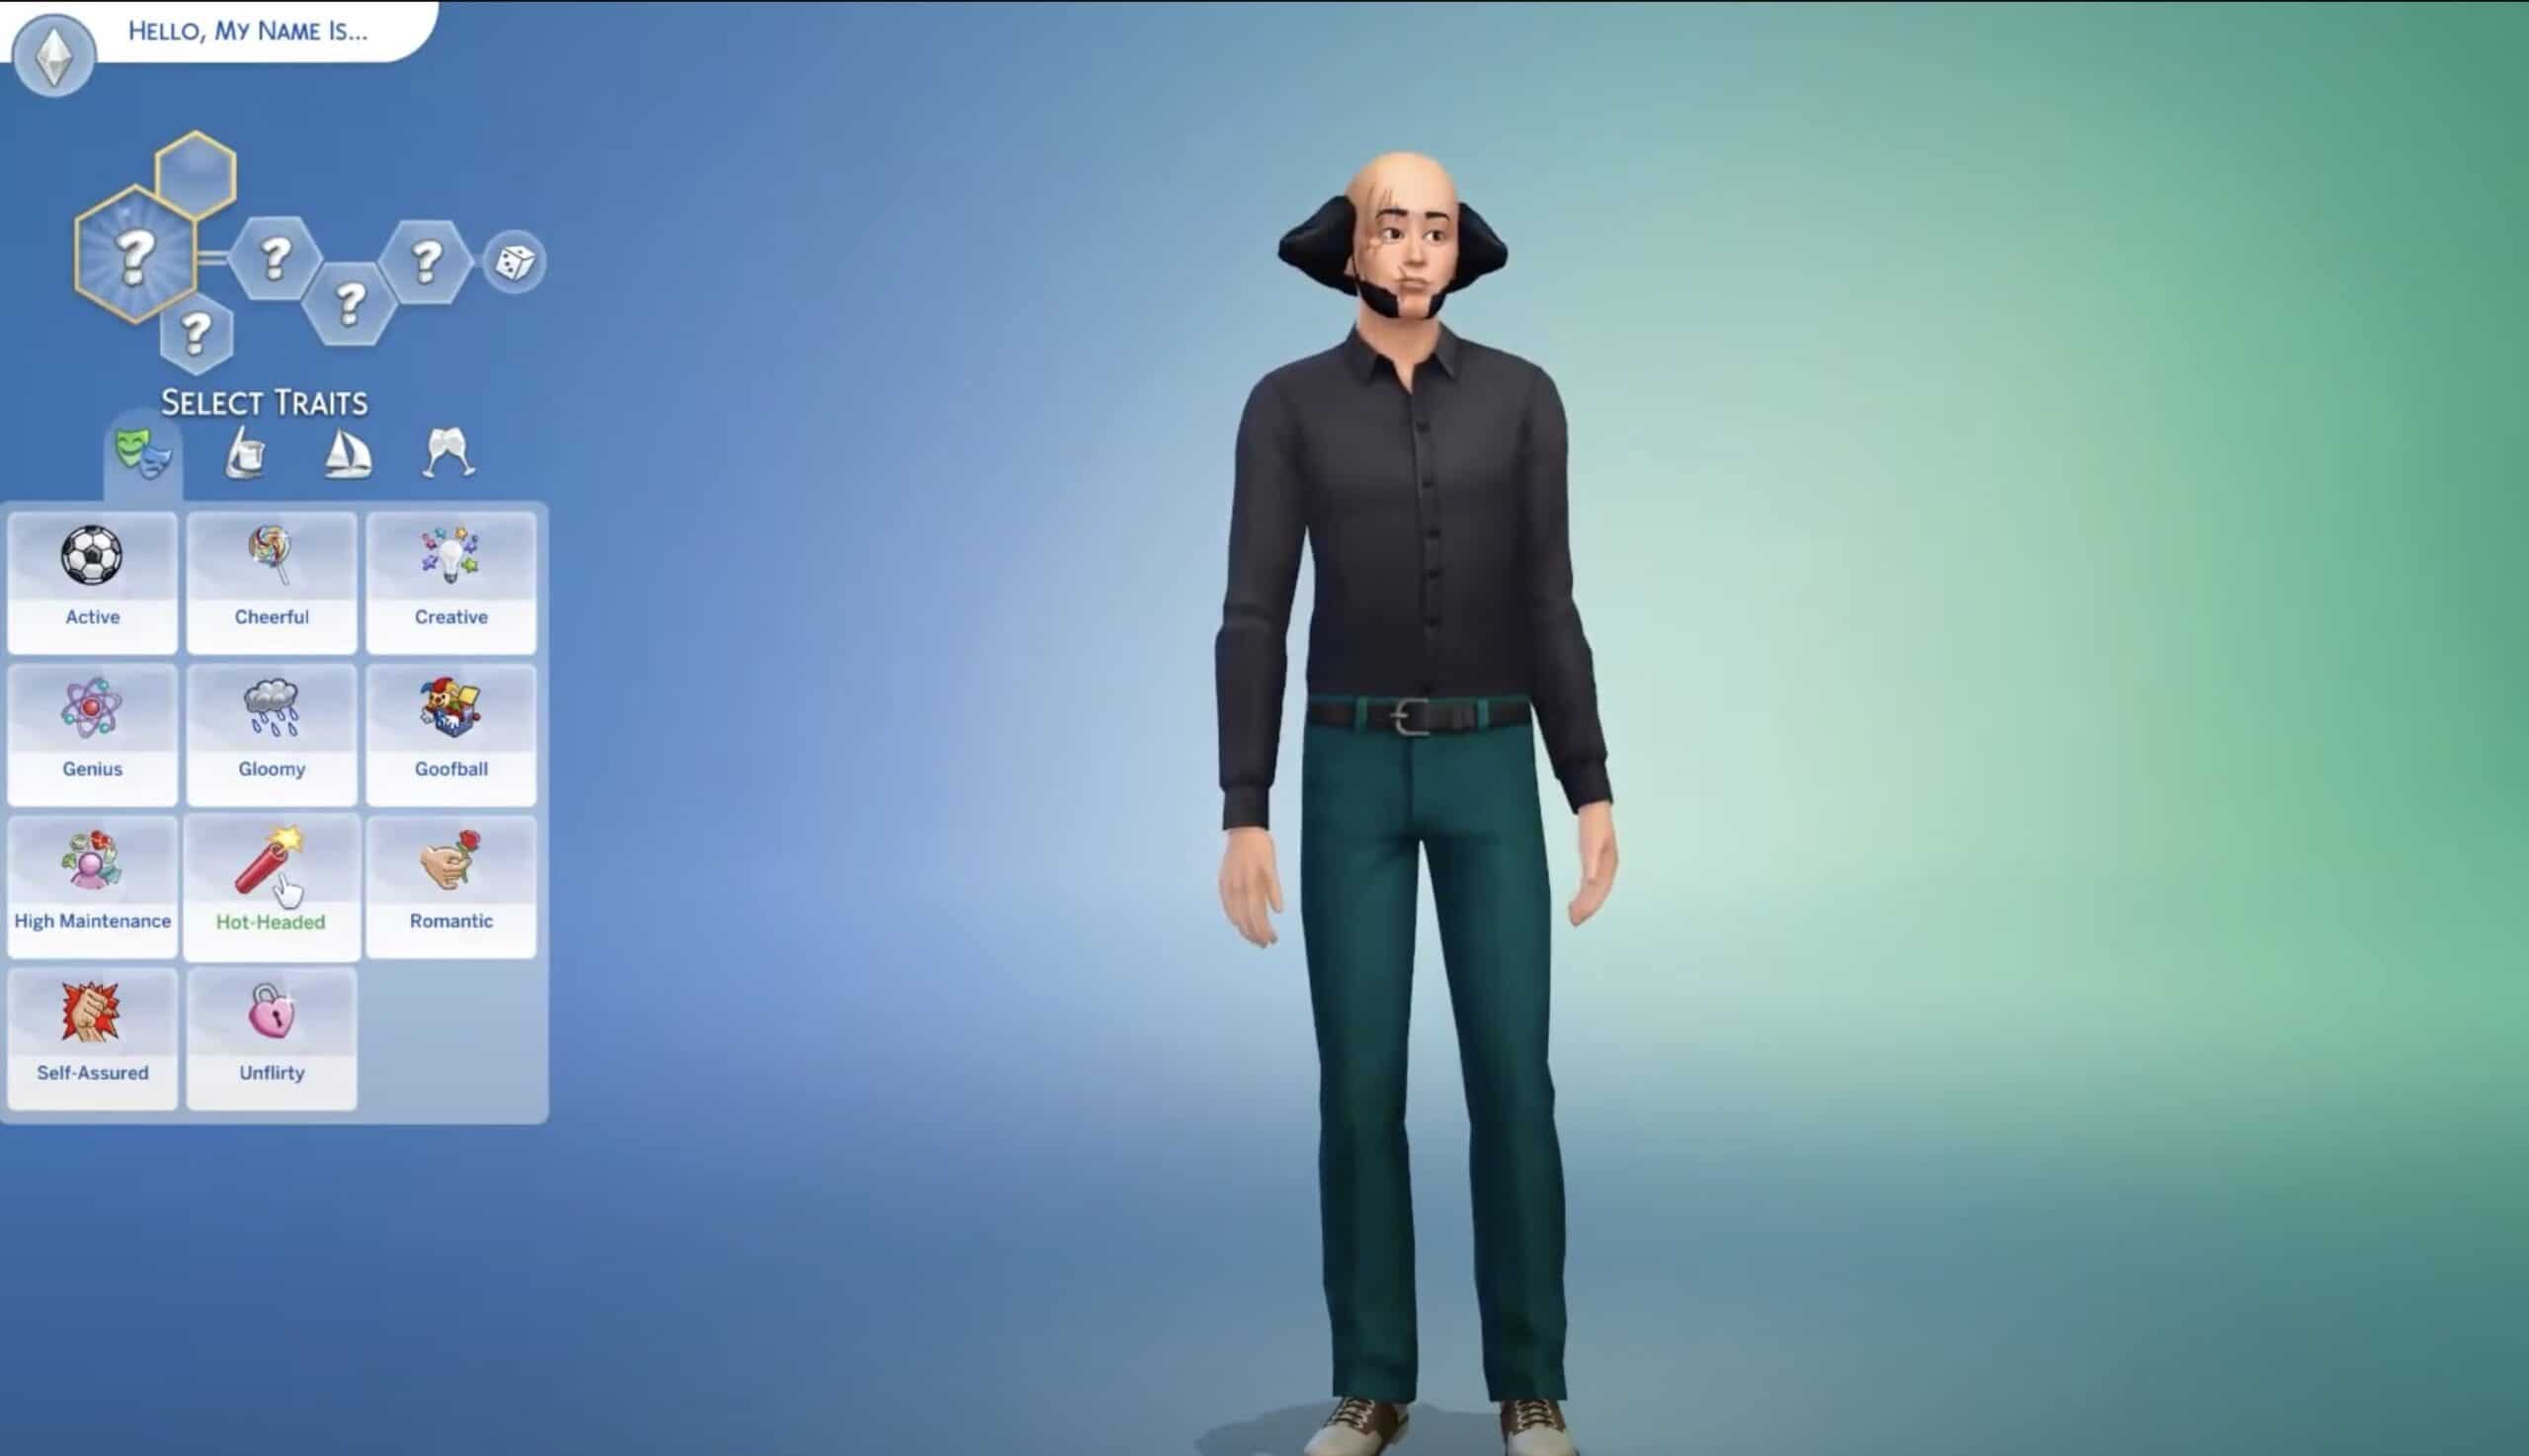 Mod The Sims - More Traits for All Ages